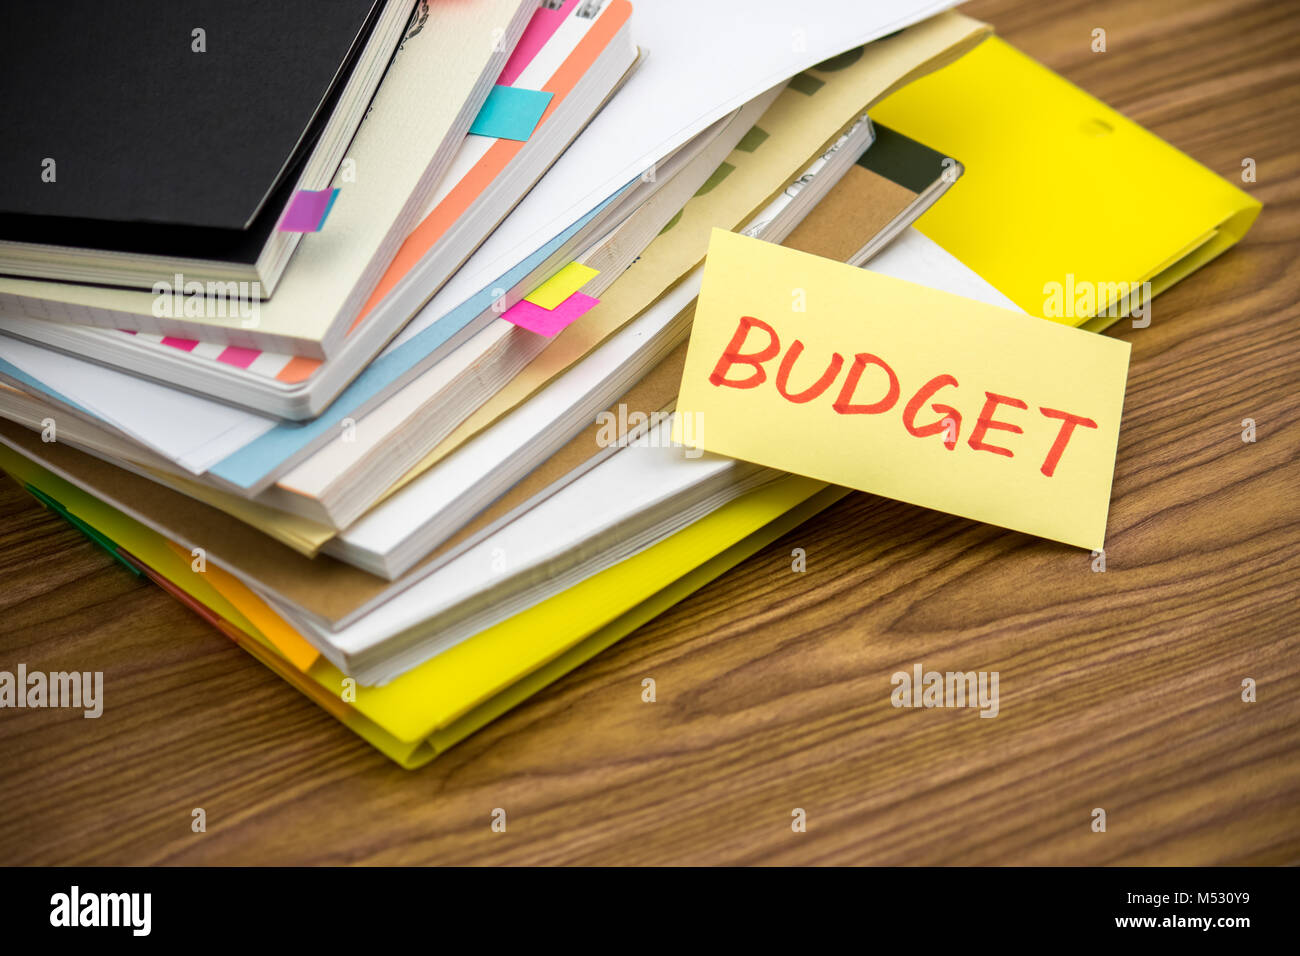 Budget; The Pile of Business Documents on the Desk Stock Photo